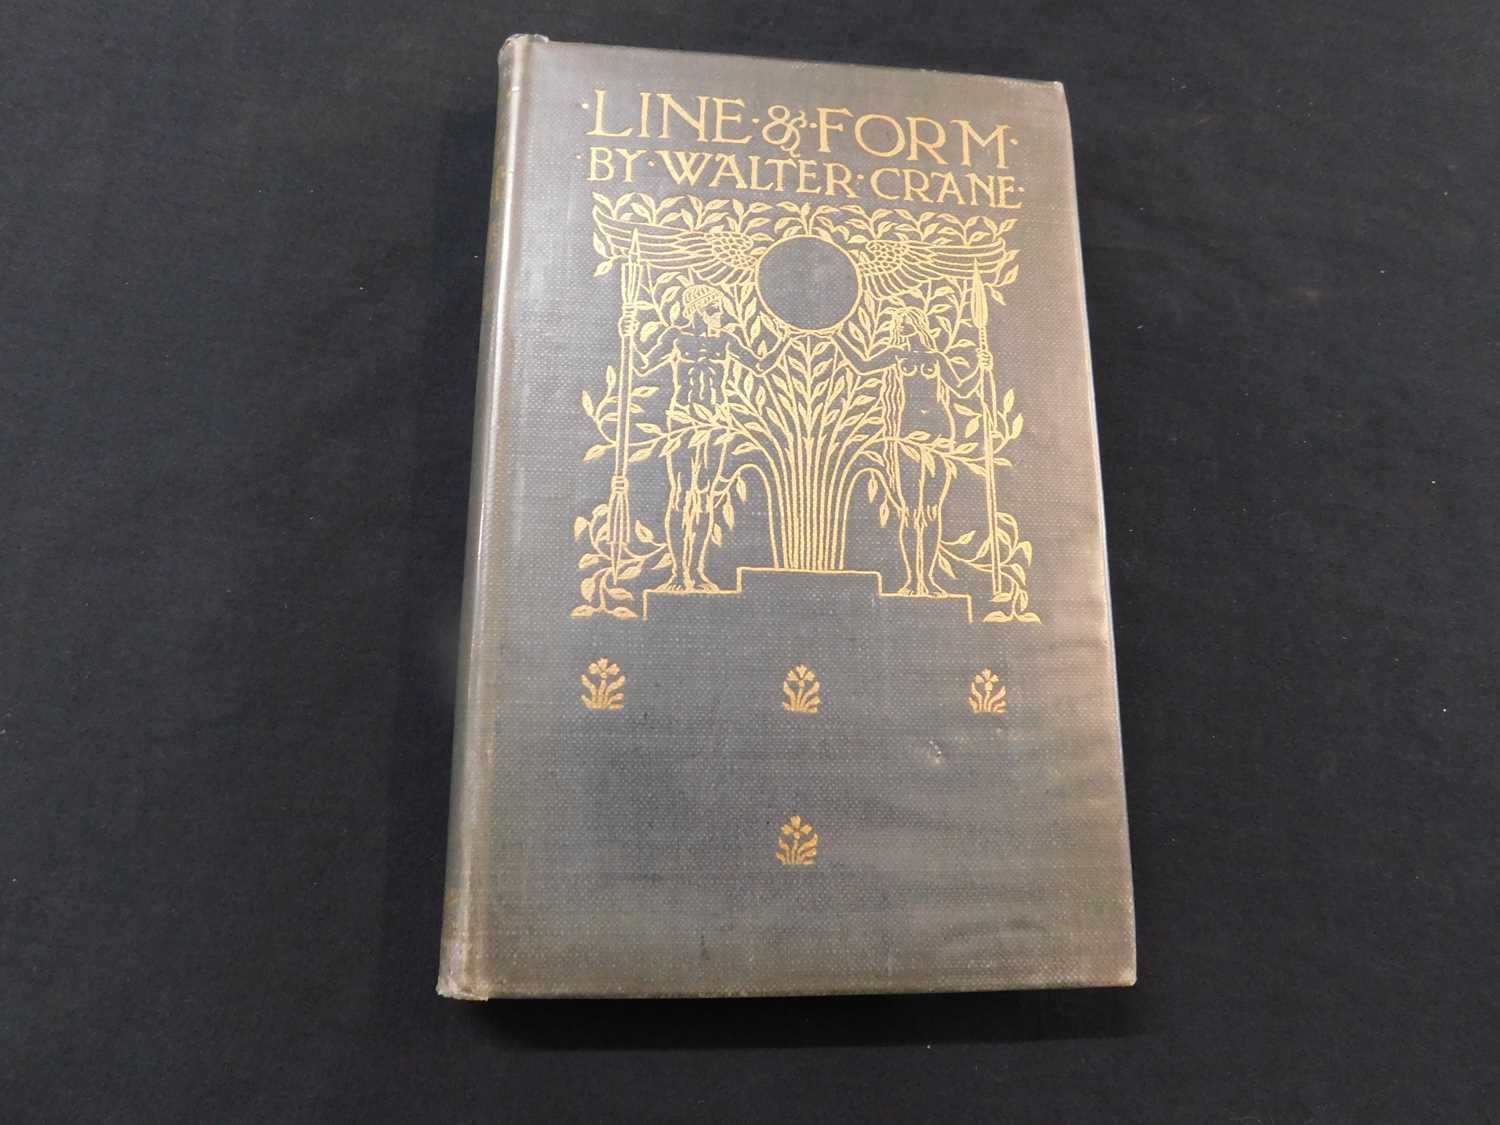 WALTER CRANE: LINE & FORM, London, George Bell & Sons, 1900, first edition, original decorative